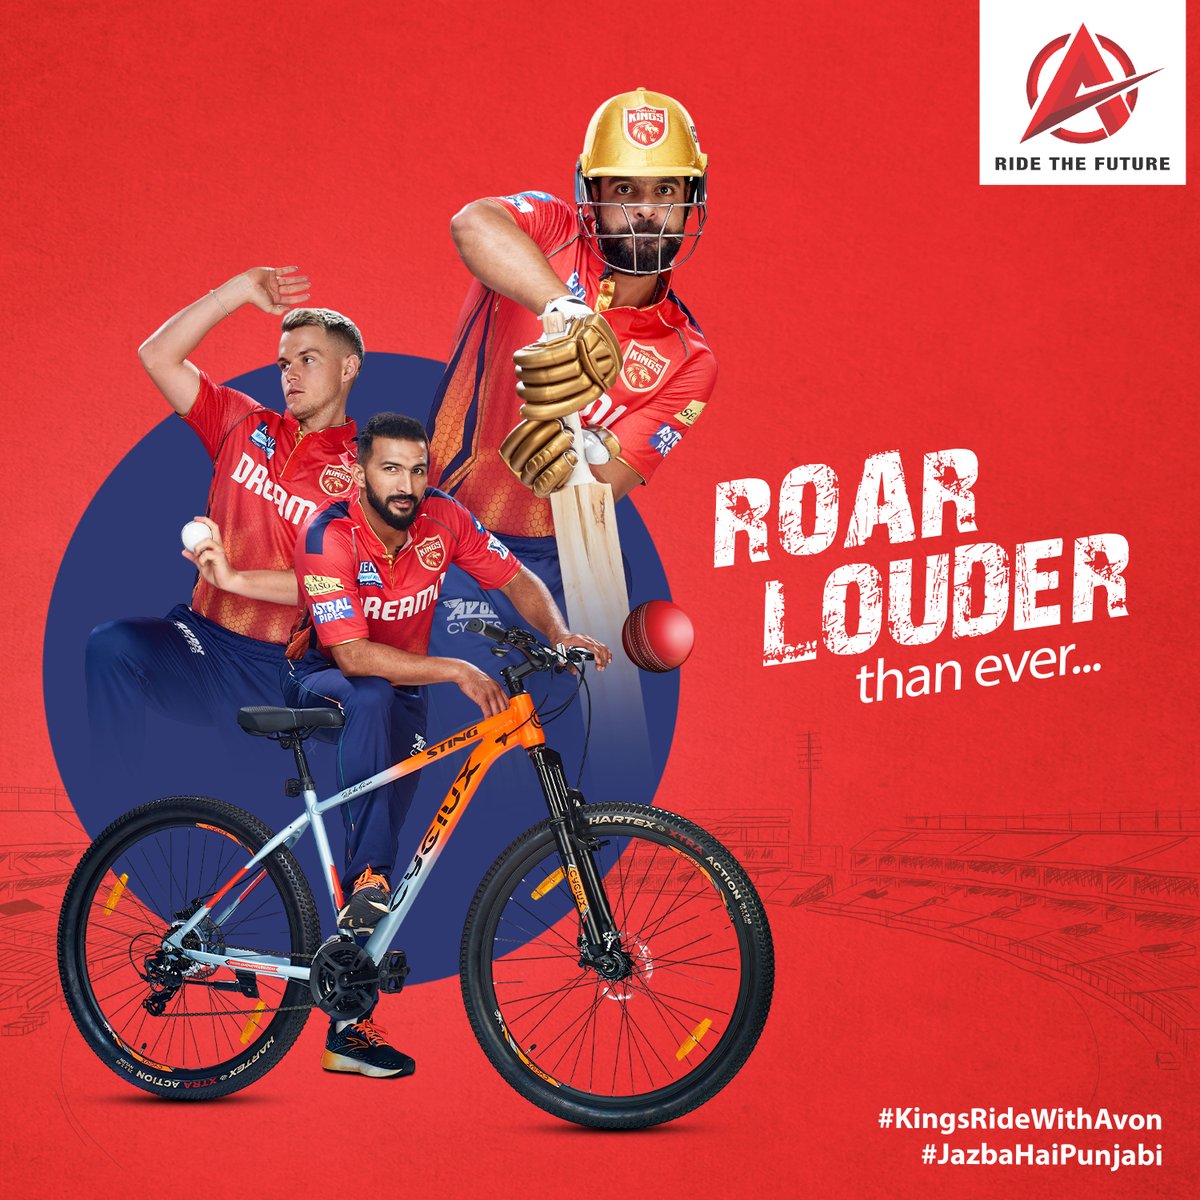 Wishing all the best to PBKS for their match with Rajasthan! May the #SherSquad conquer the field🏏🔥 #SaddaPunjab #PBKSvsRajasthan #T20Match2024 #PBKS #KingsRideWithAvon #JazbaHaiPunjabi